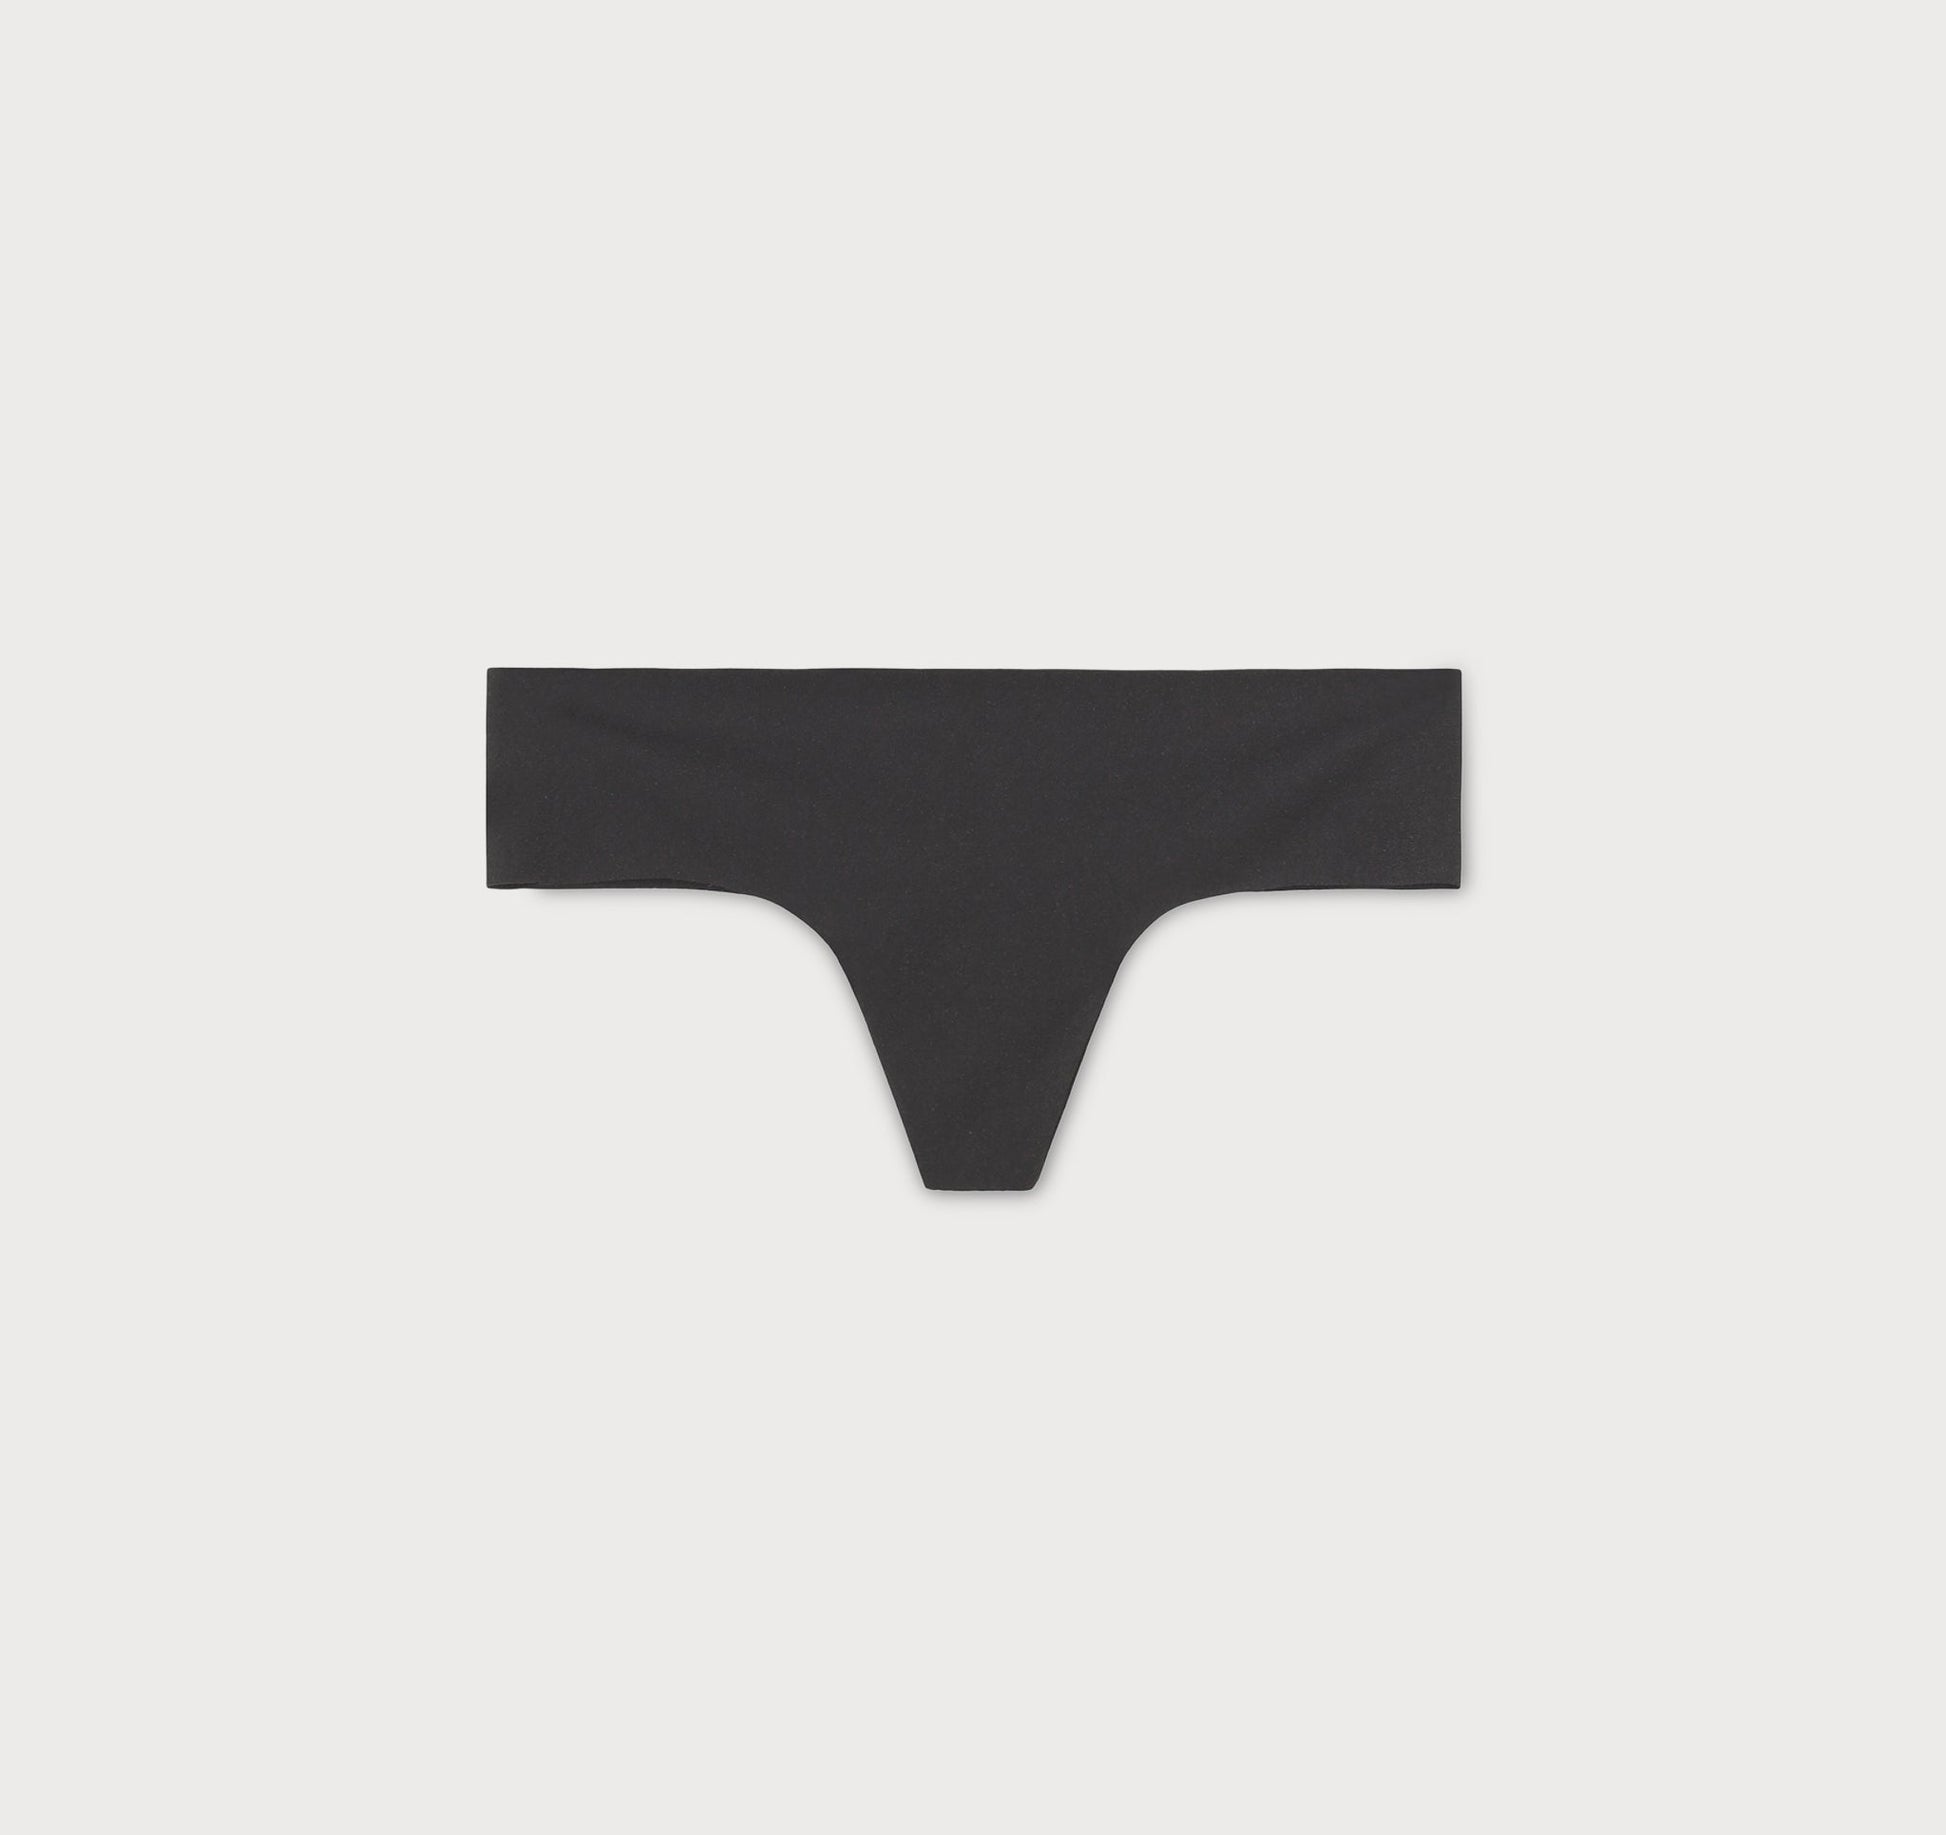 Calvin Klein Perfectly Fit Flex Thong - Belle Lingerie